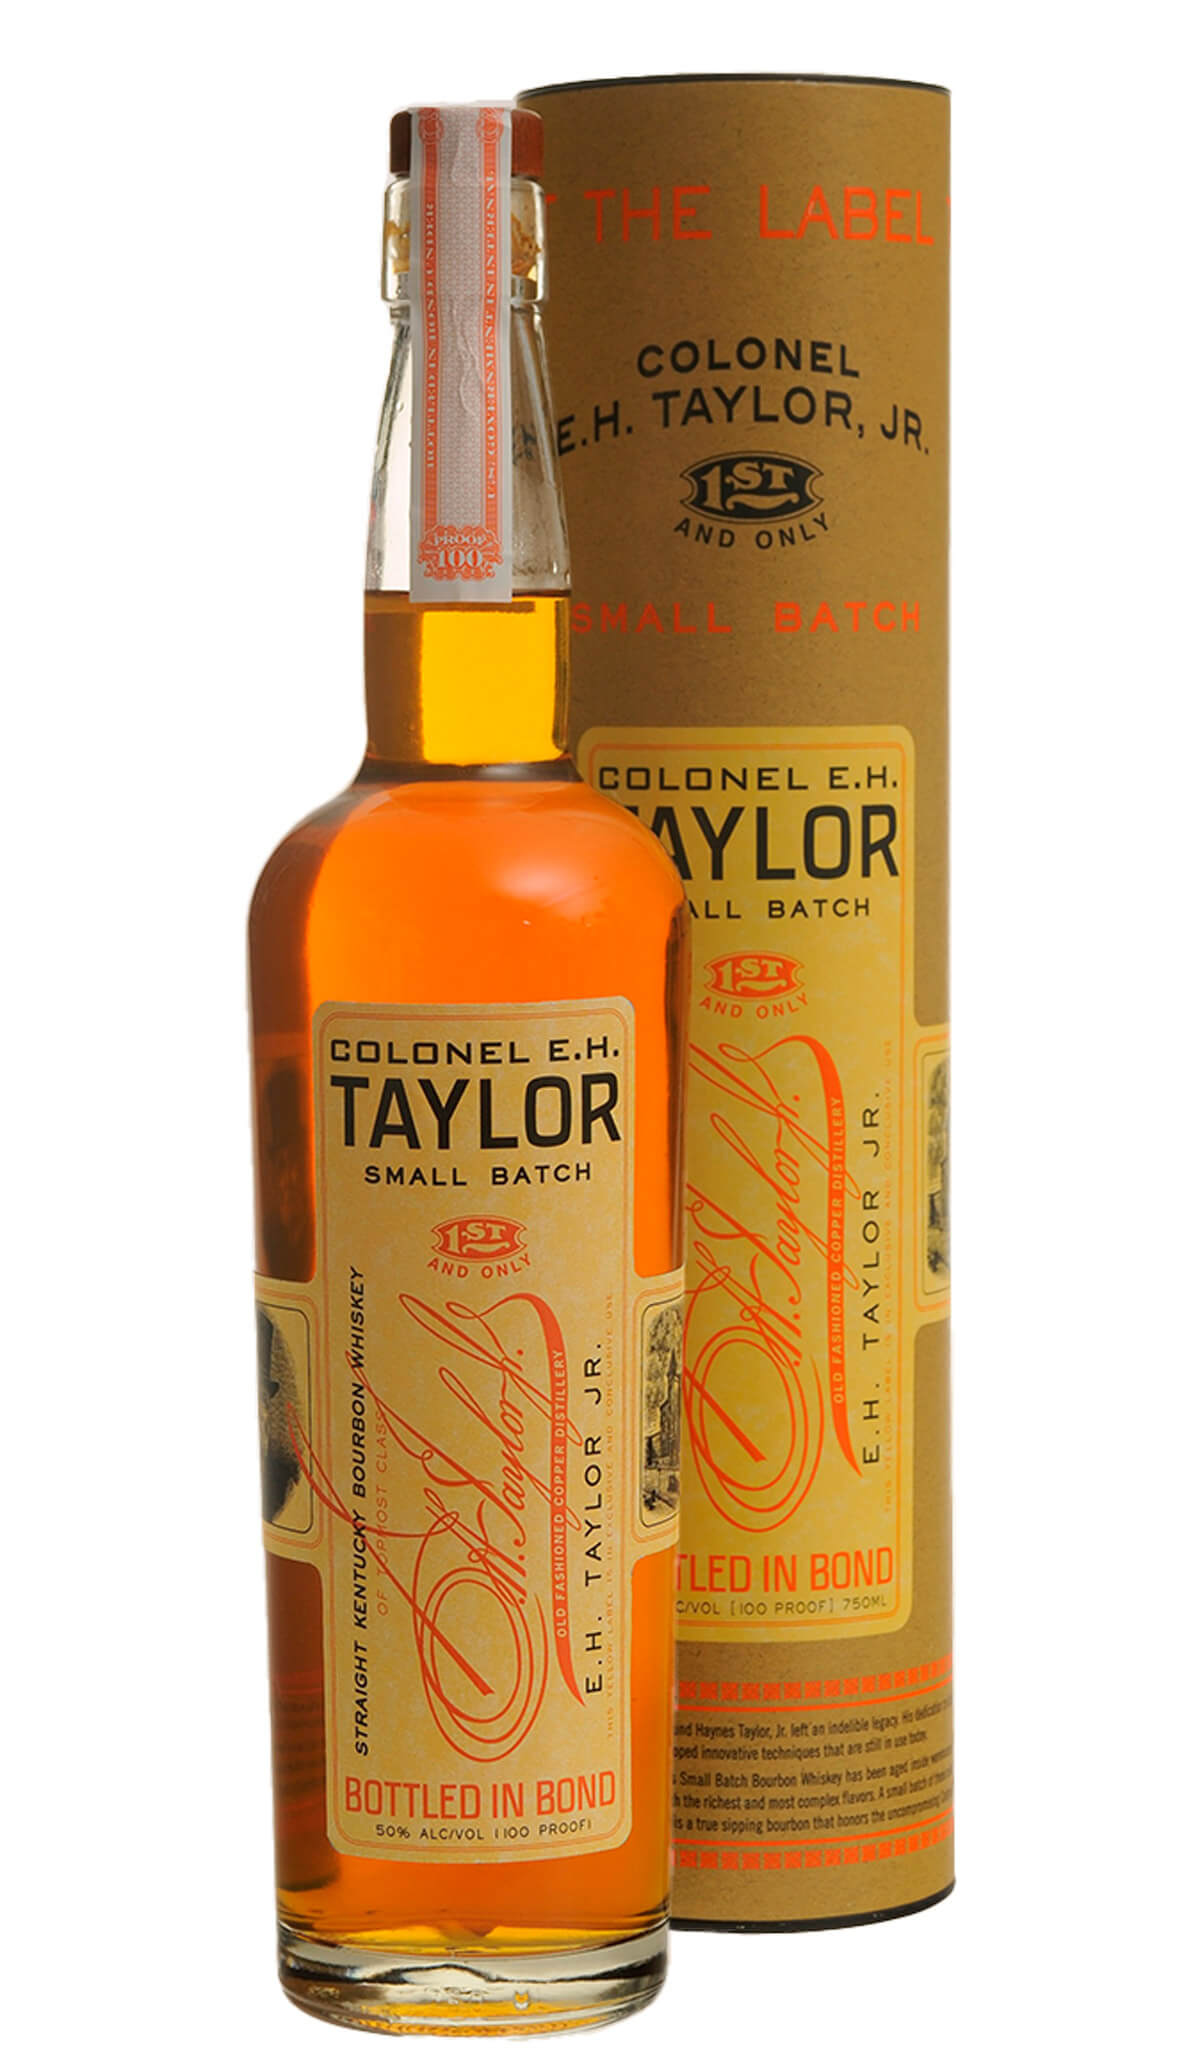 Find out more, explore the range and purchase Buffalo Trace EH Taylor Small Batch Kentucky Straight Bourbon 700mL available online at Wine Sellers Direct - Australia's independent liquor specialists.